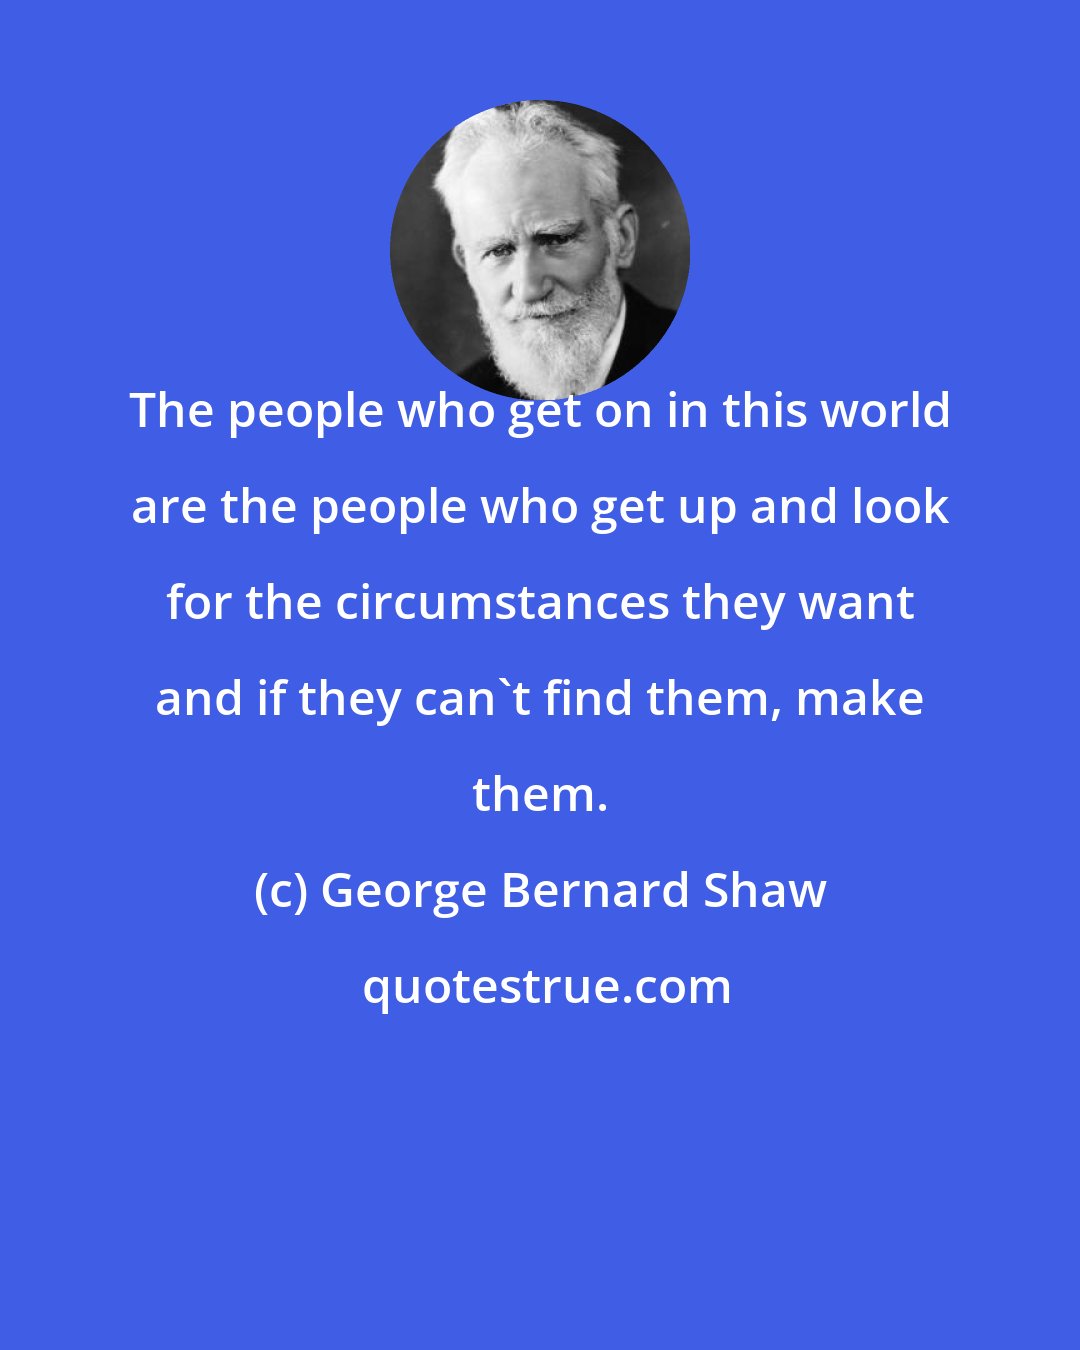 George Bernard Shaw: The people who get on in this world are the people who get up and look for the circumstances they want and if they can't find them, make them.